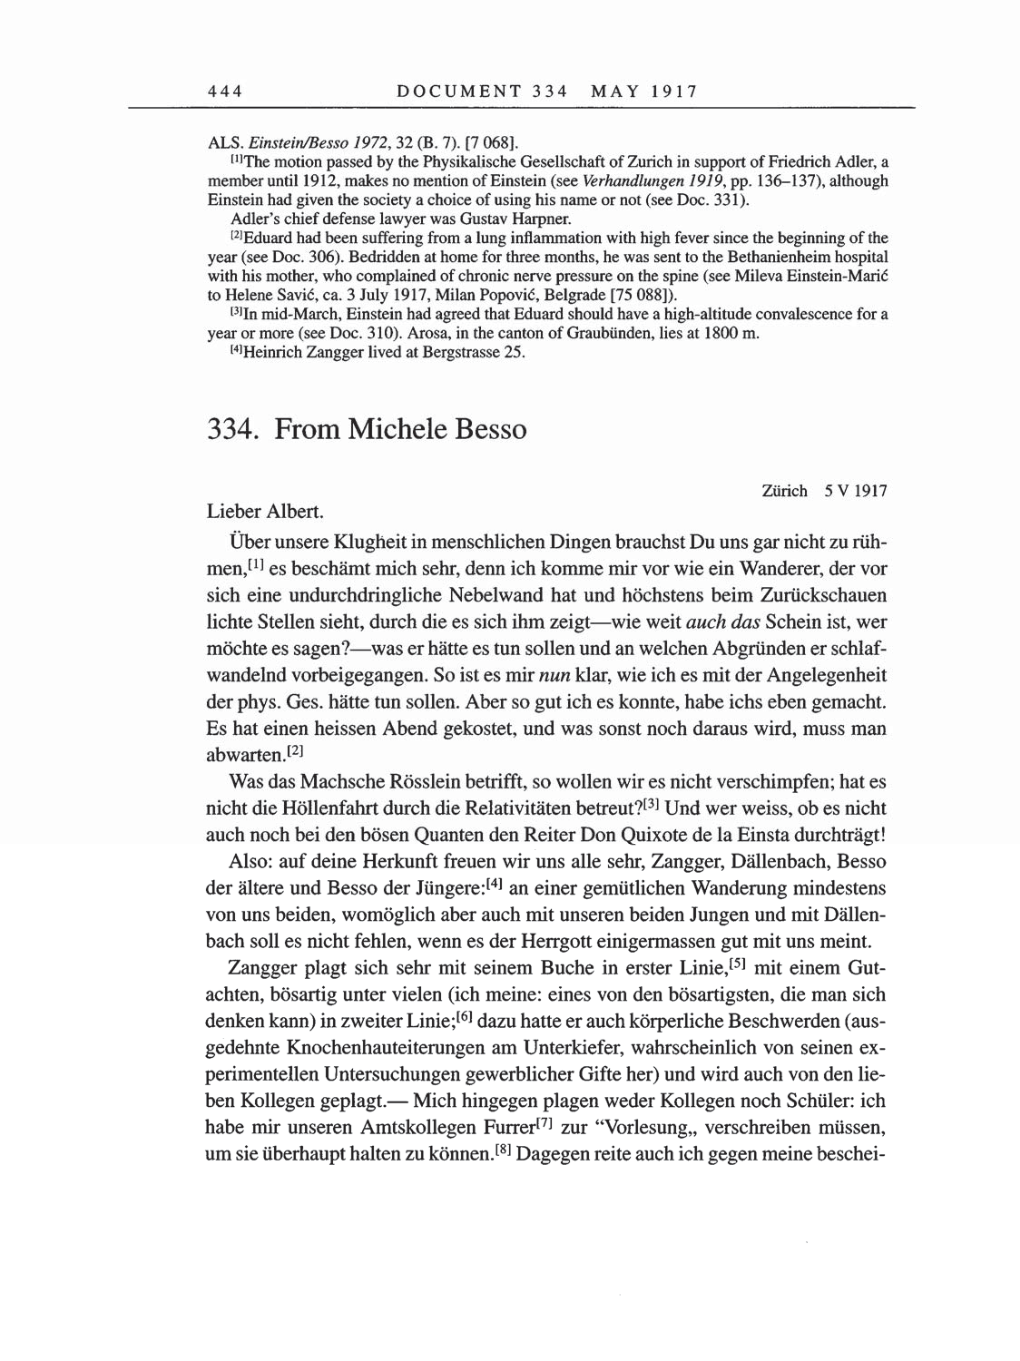 Volume 8, Part A: The Berlin Years: Correspondence 1914-1917 page 444